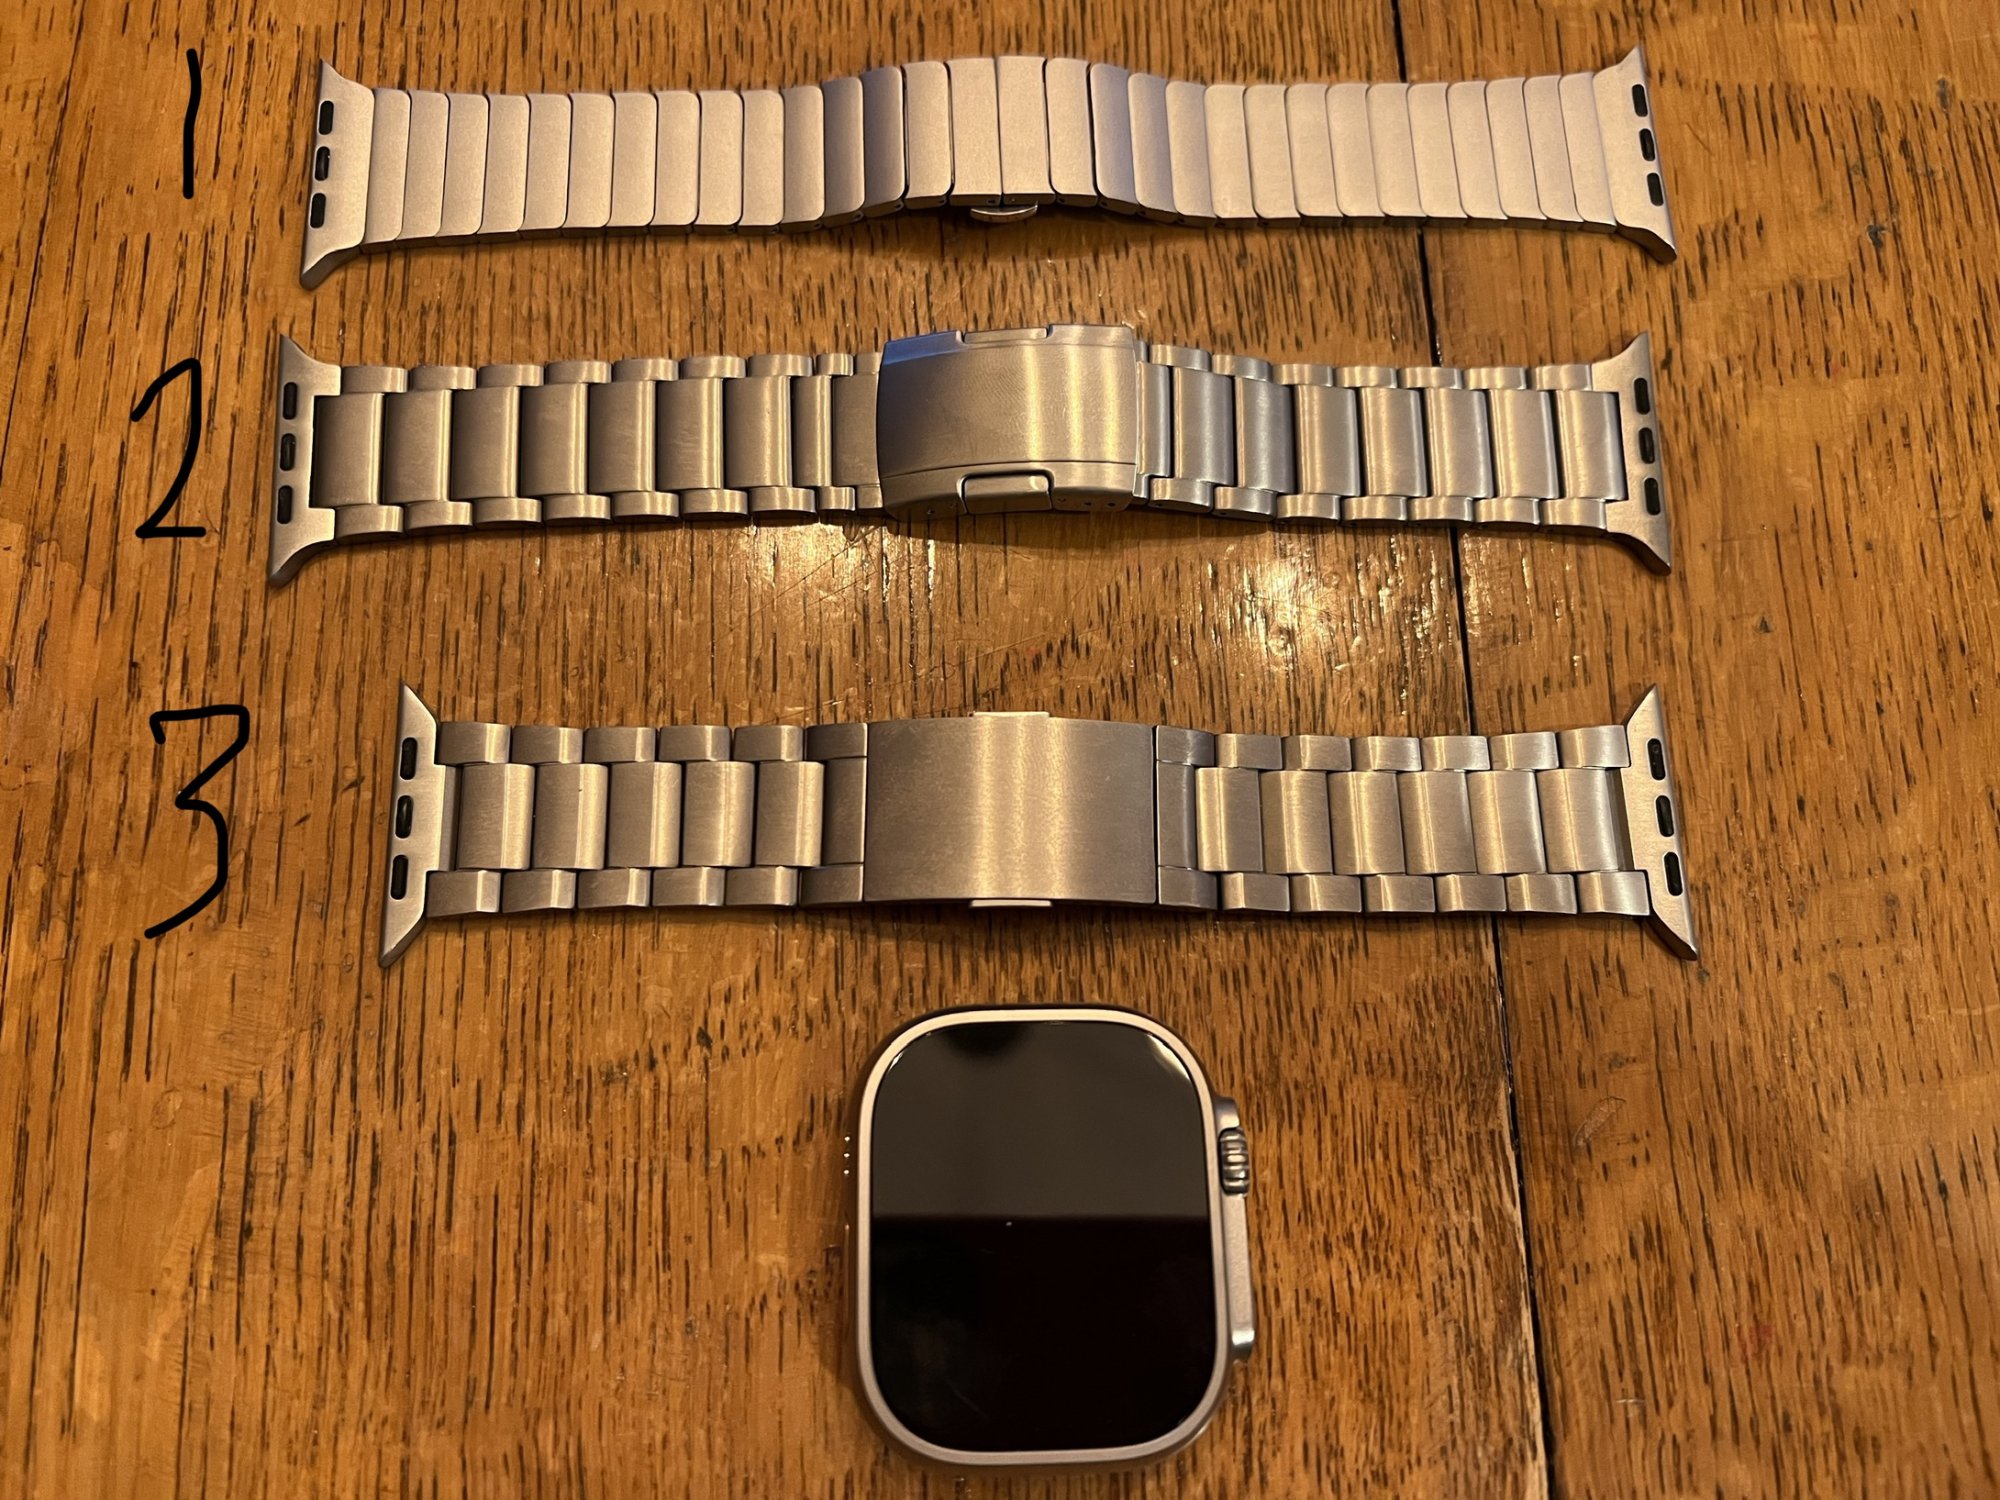 LDFAS Titanium Bands for Apple Watch Ultra 2 49mm 49MM/45MM/44MM/42MM / Silver Gray